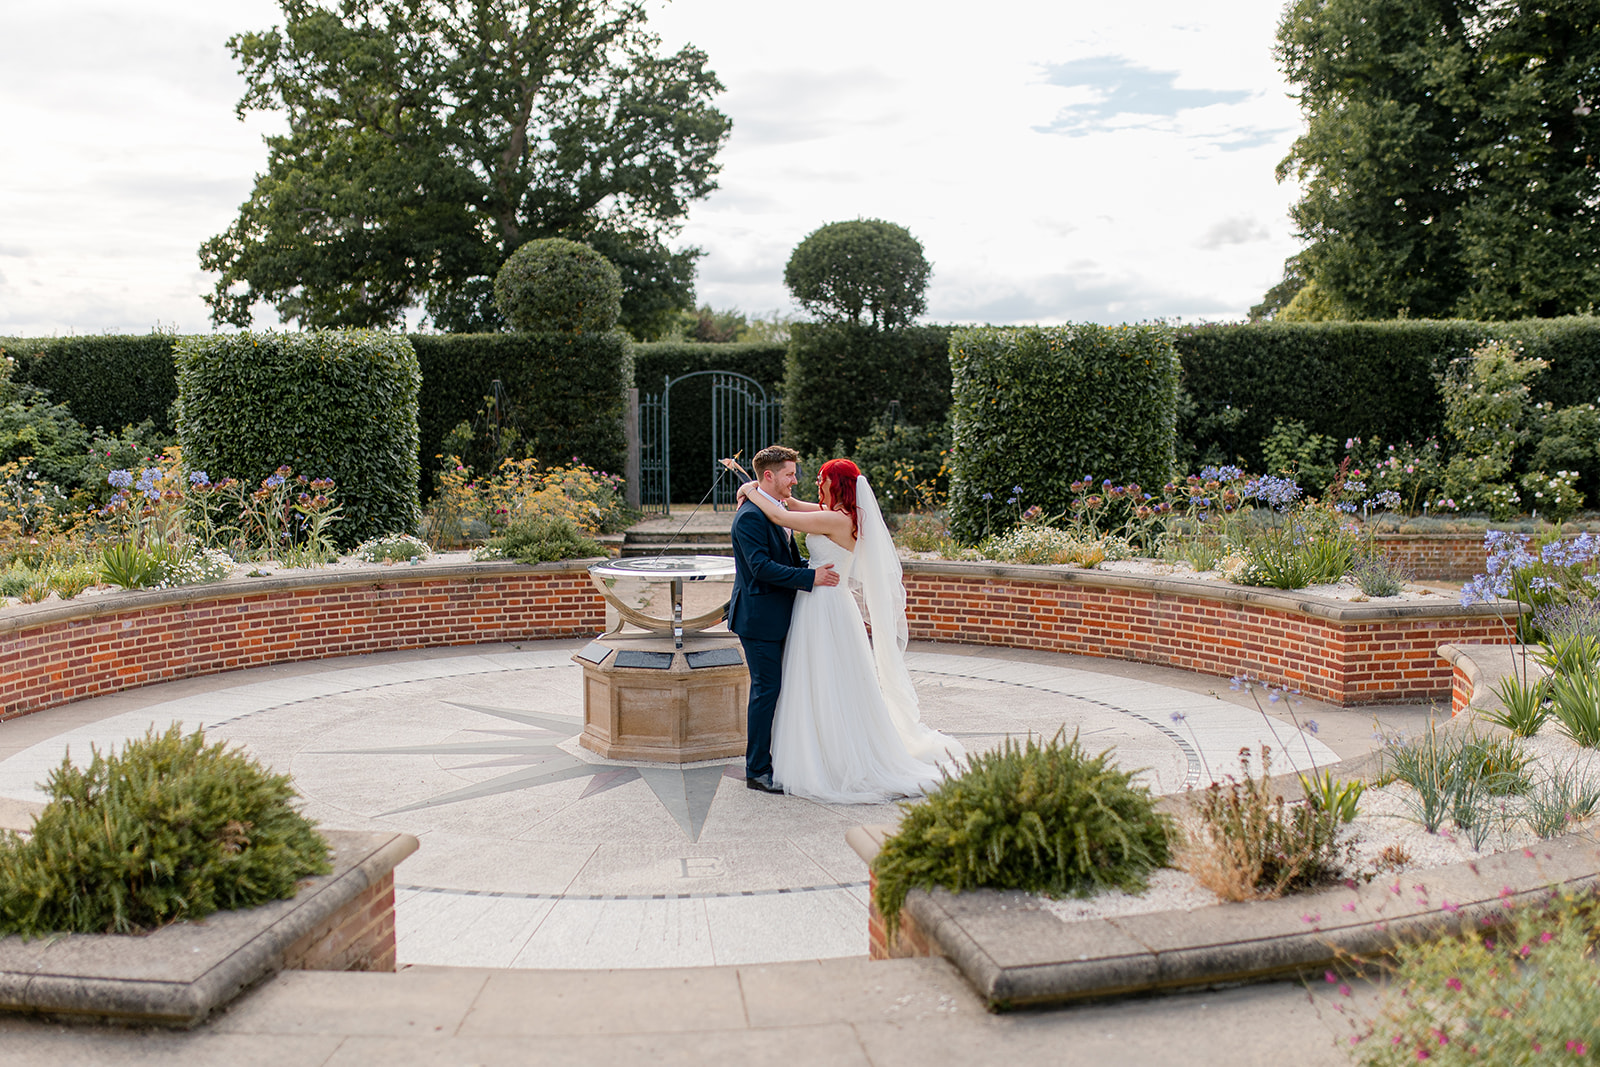 A couple who just got married, enjoy a walk around the gardens at Hatfield House